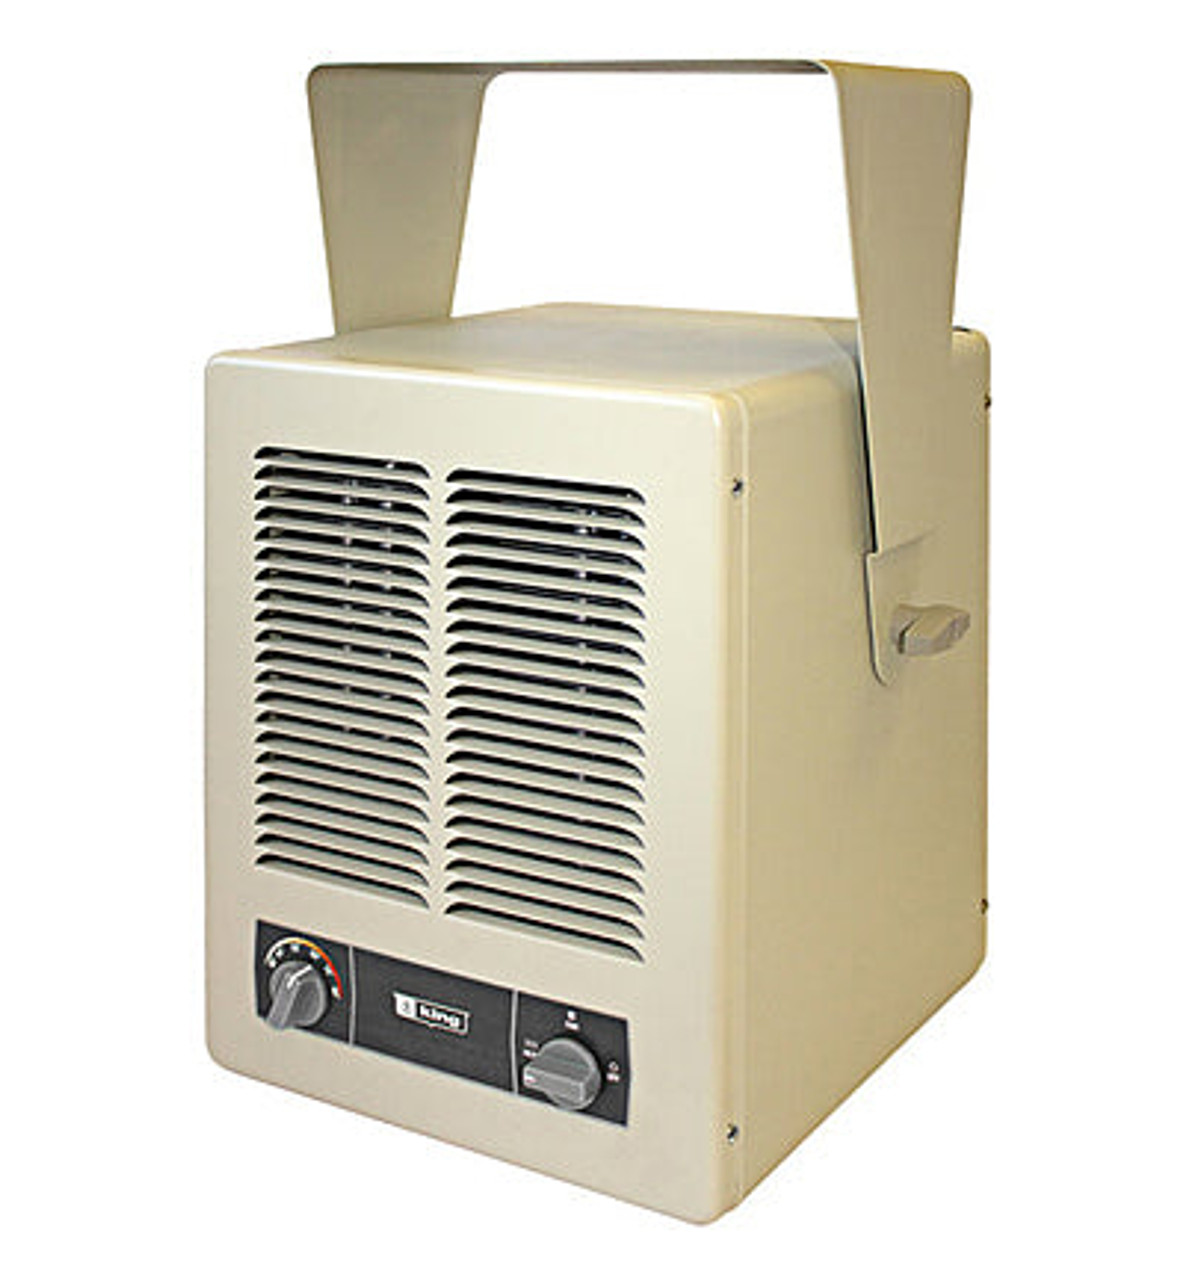 Charley's 120-Volt Greenhouse Heater